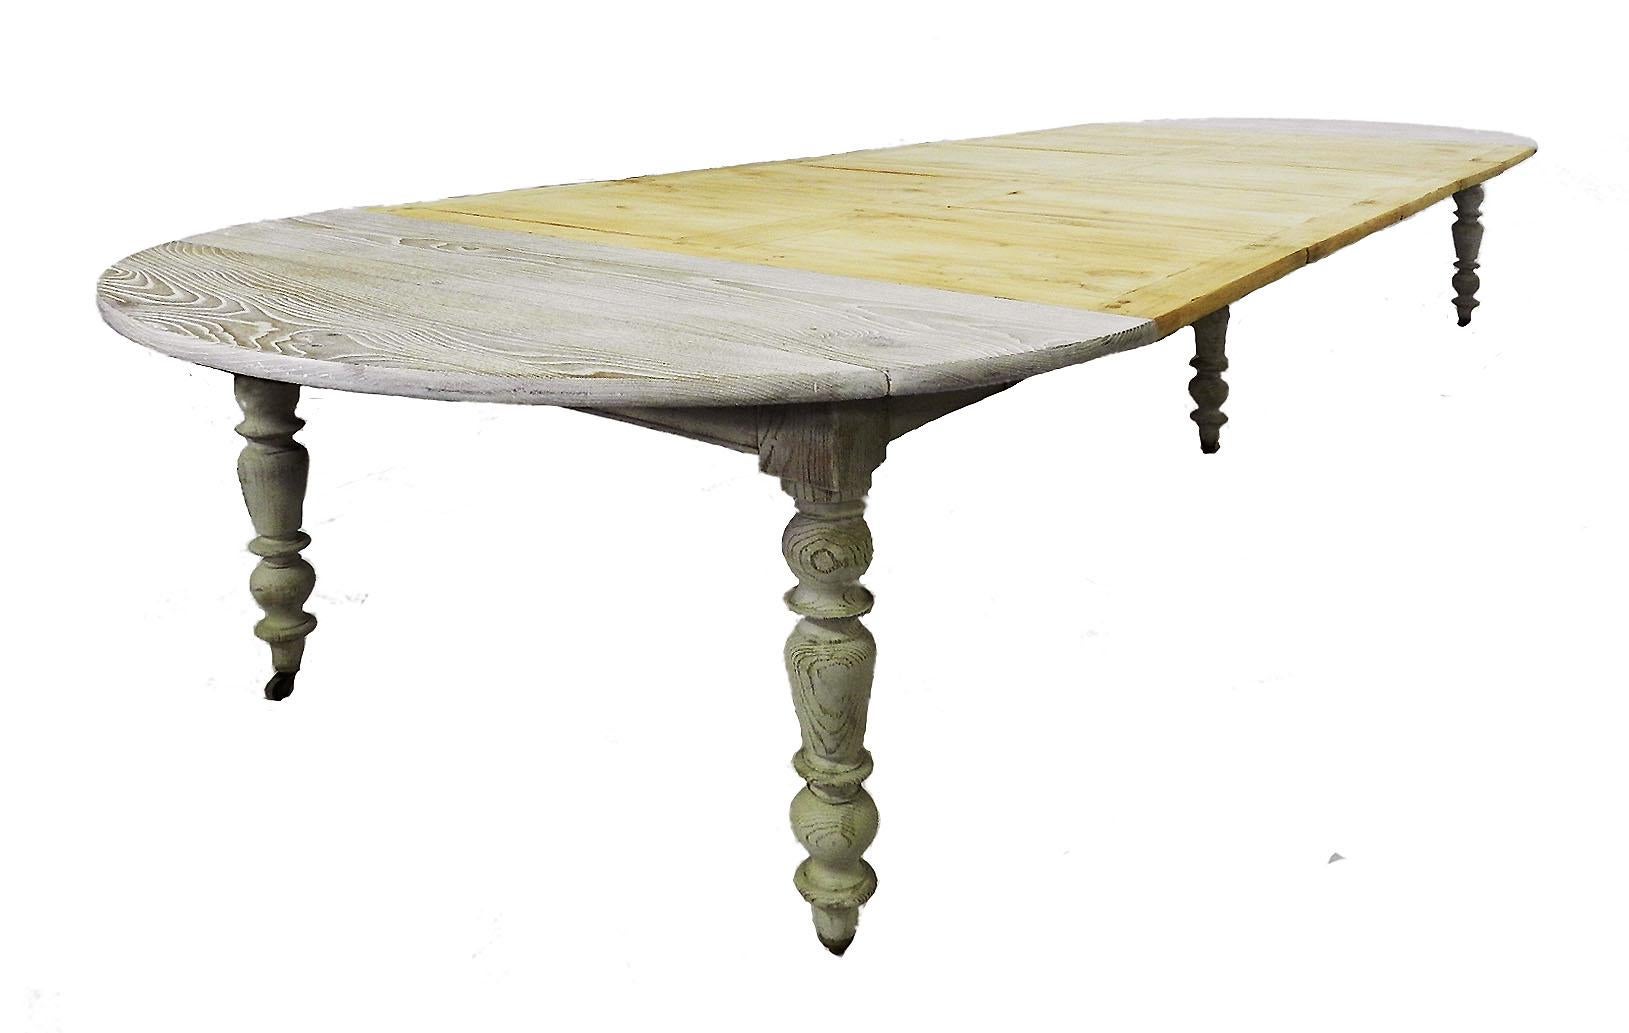 French Extendable drop-leaf dining table 19th century it extends to 13.3 feet / 4meters with 5 plain leaves (easily painted) or use with tablecloth
A very versatile table taking very little space and then can be extended to accommodate up to 12 (or